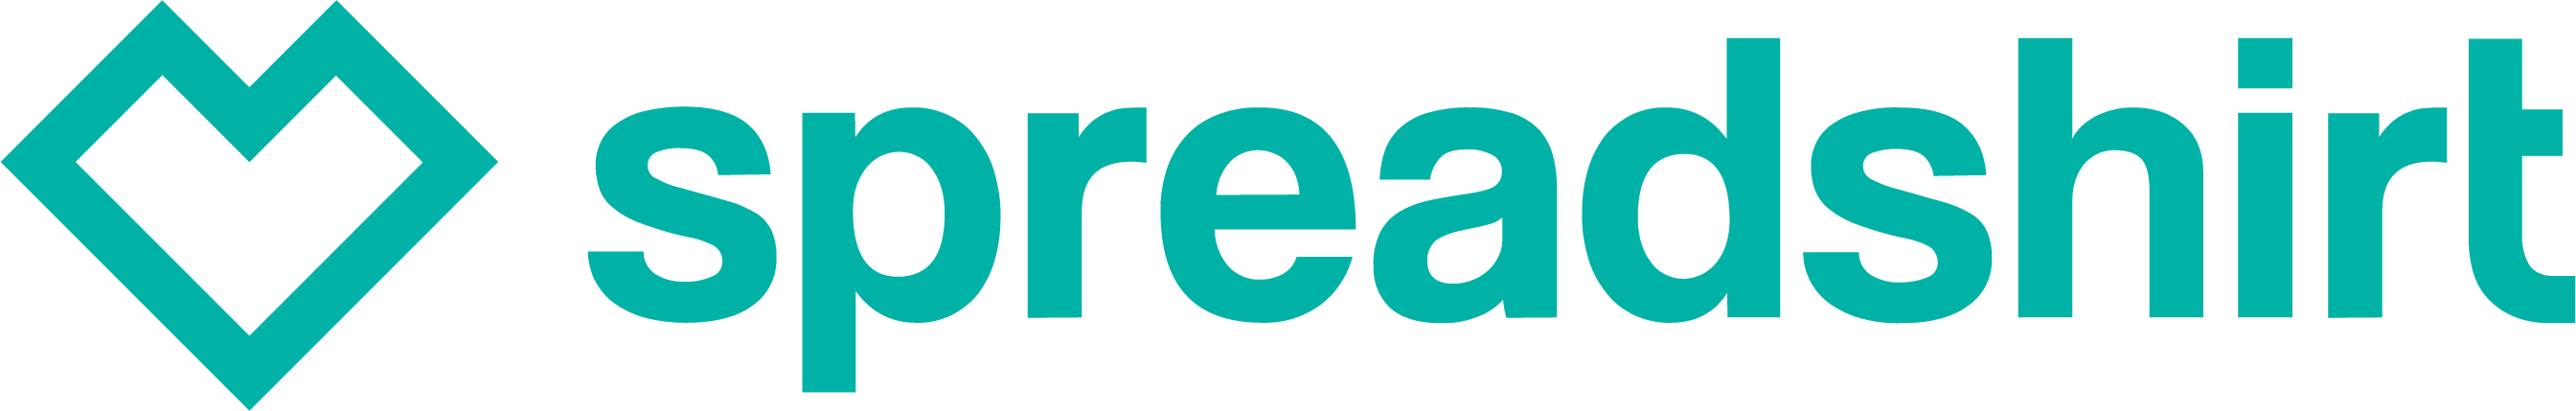 Spreadshirt Logo png